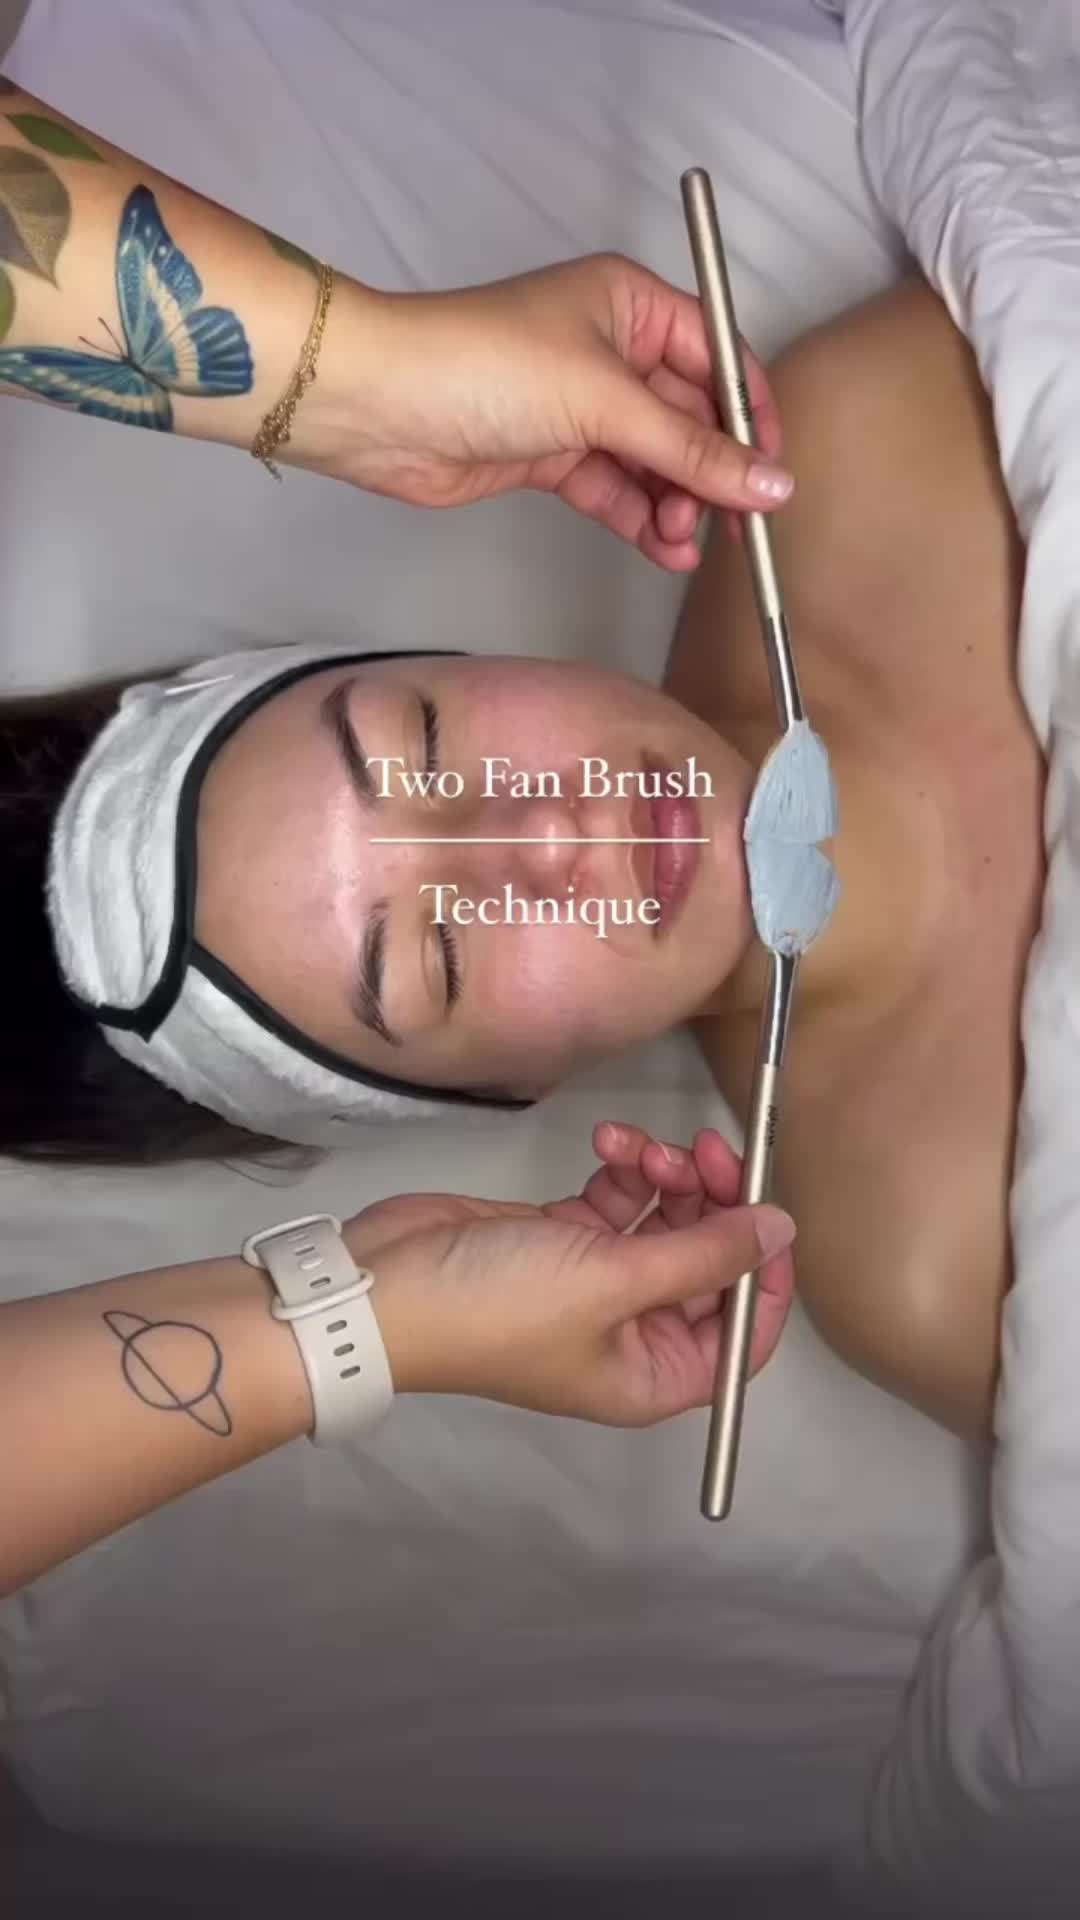 This contains an image of: Using the best glow skincare fan brushes